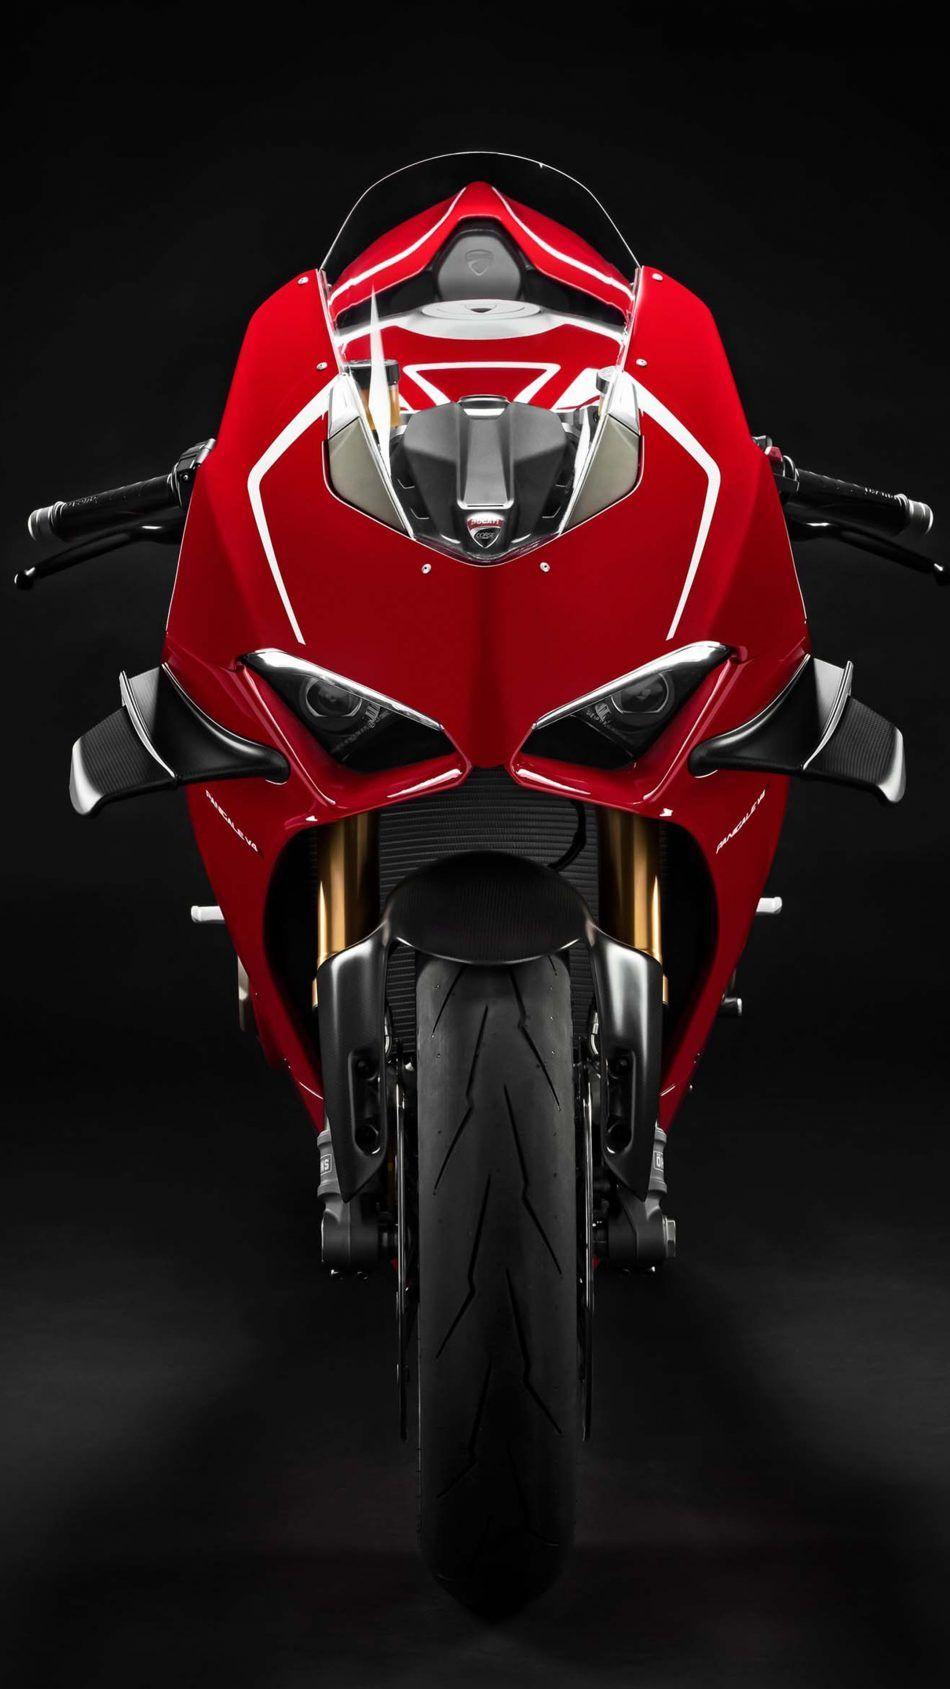 Super Bikes Hd Wallpapers For Mobile